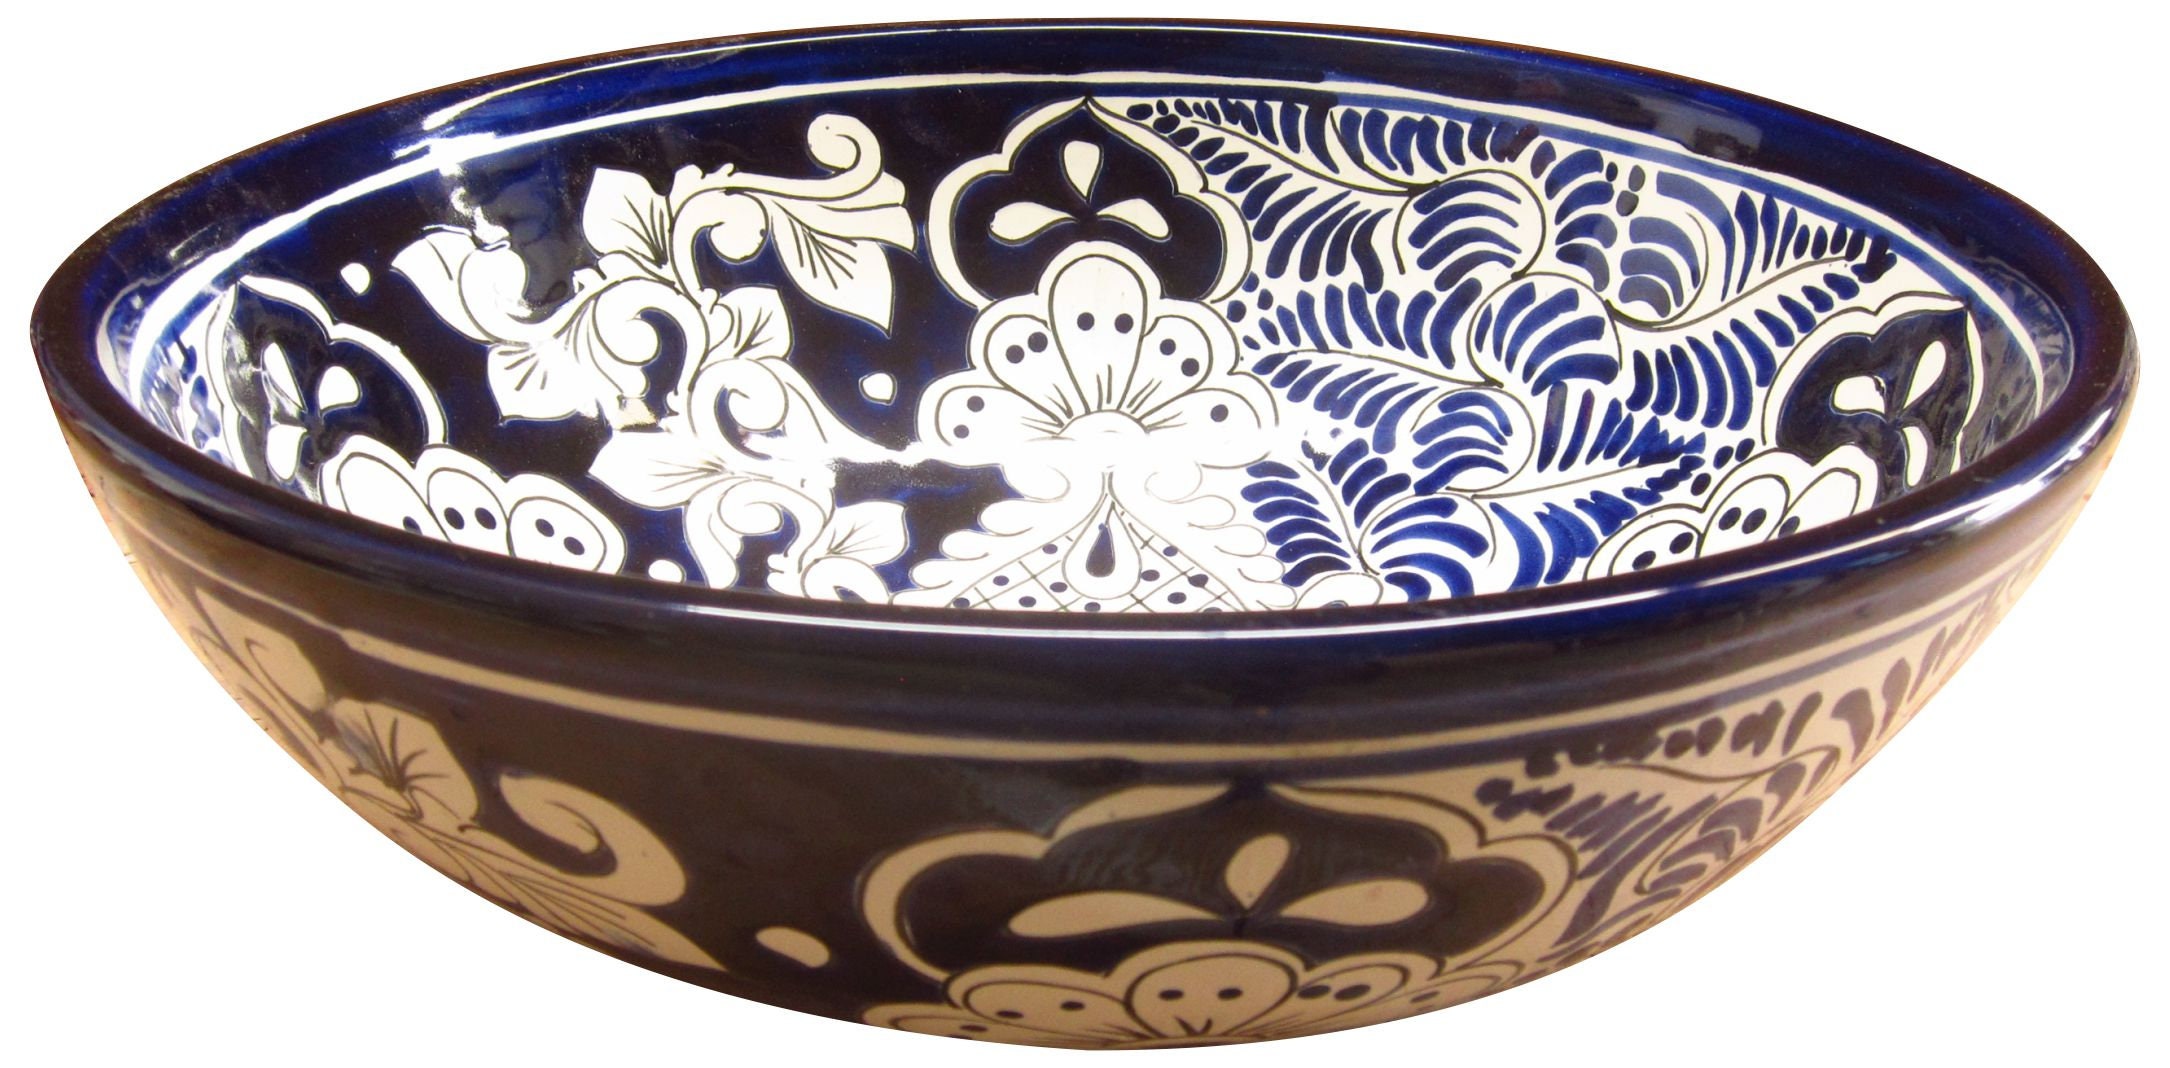 top quality Mexican Vessel Talavera Sinks Talavera Vessel Mexican Sink  Colorful – Round Rustic Handcrafted Sinks Ceramic - Acapulco Azul - 